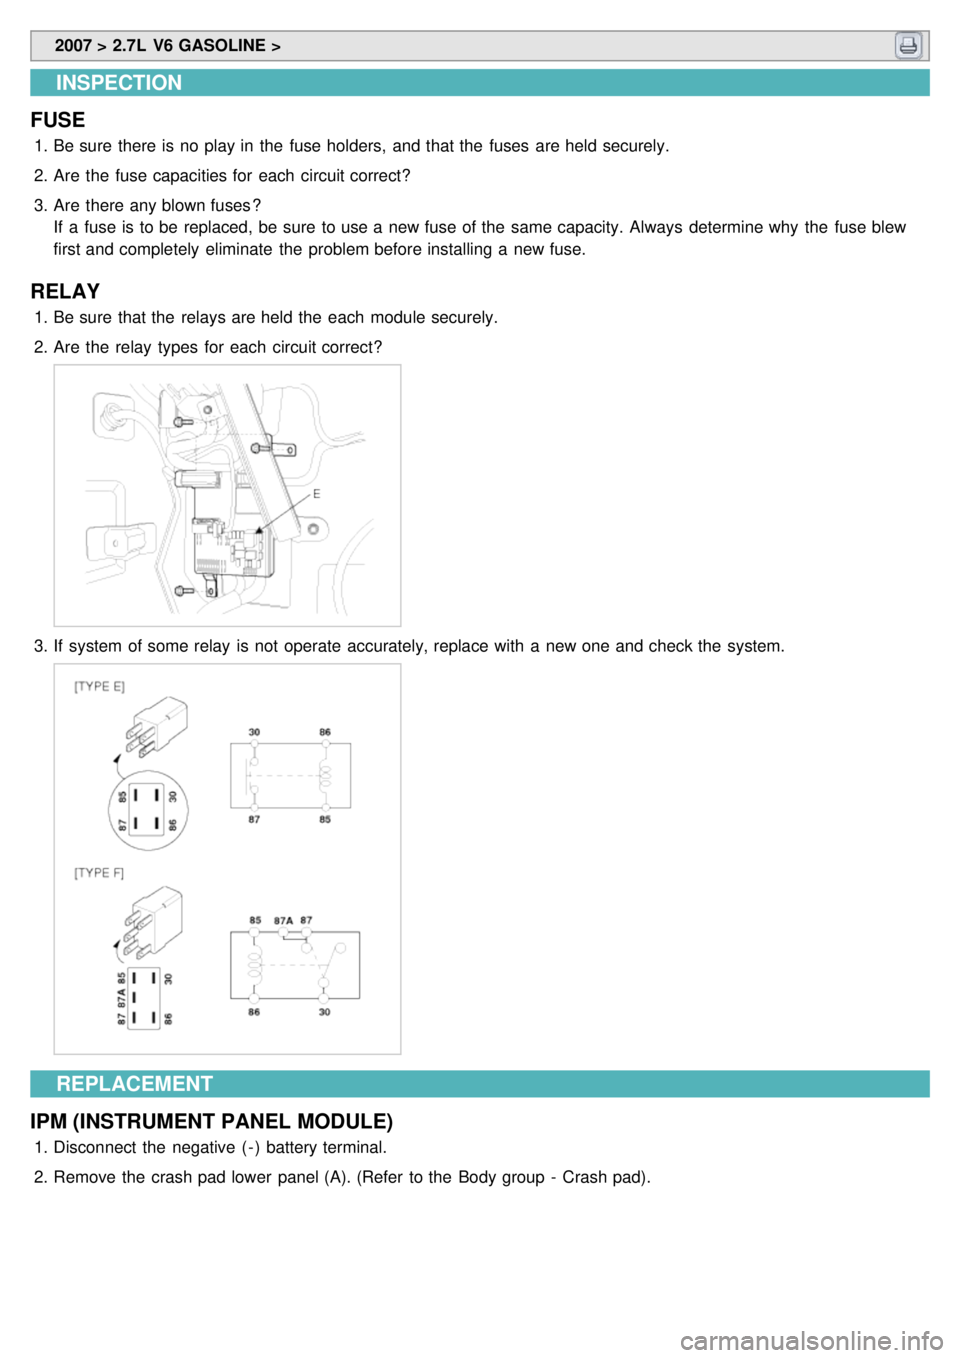 KIA CARNIVAL 2007  Workshop Manual  2007 > 2.7L  V6 GASOLINE > 
INSPECTION
FUSE
1. Be sure  there is no play in  the  fuse holders,  and that the  fuses  are held securely.
2. Are  the  fuse capacities for  each  circuit correct?
3. Ar